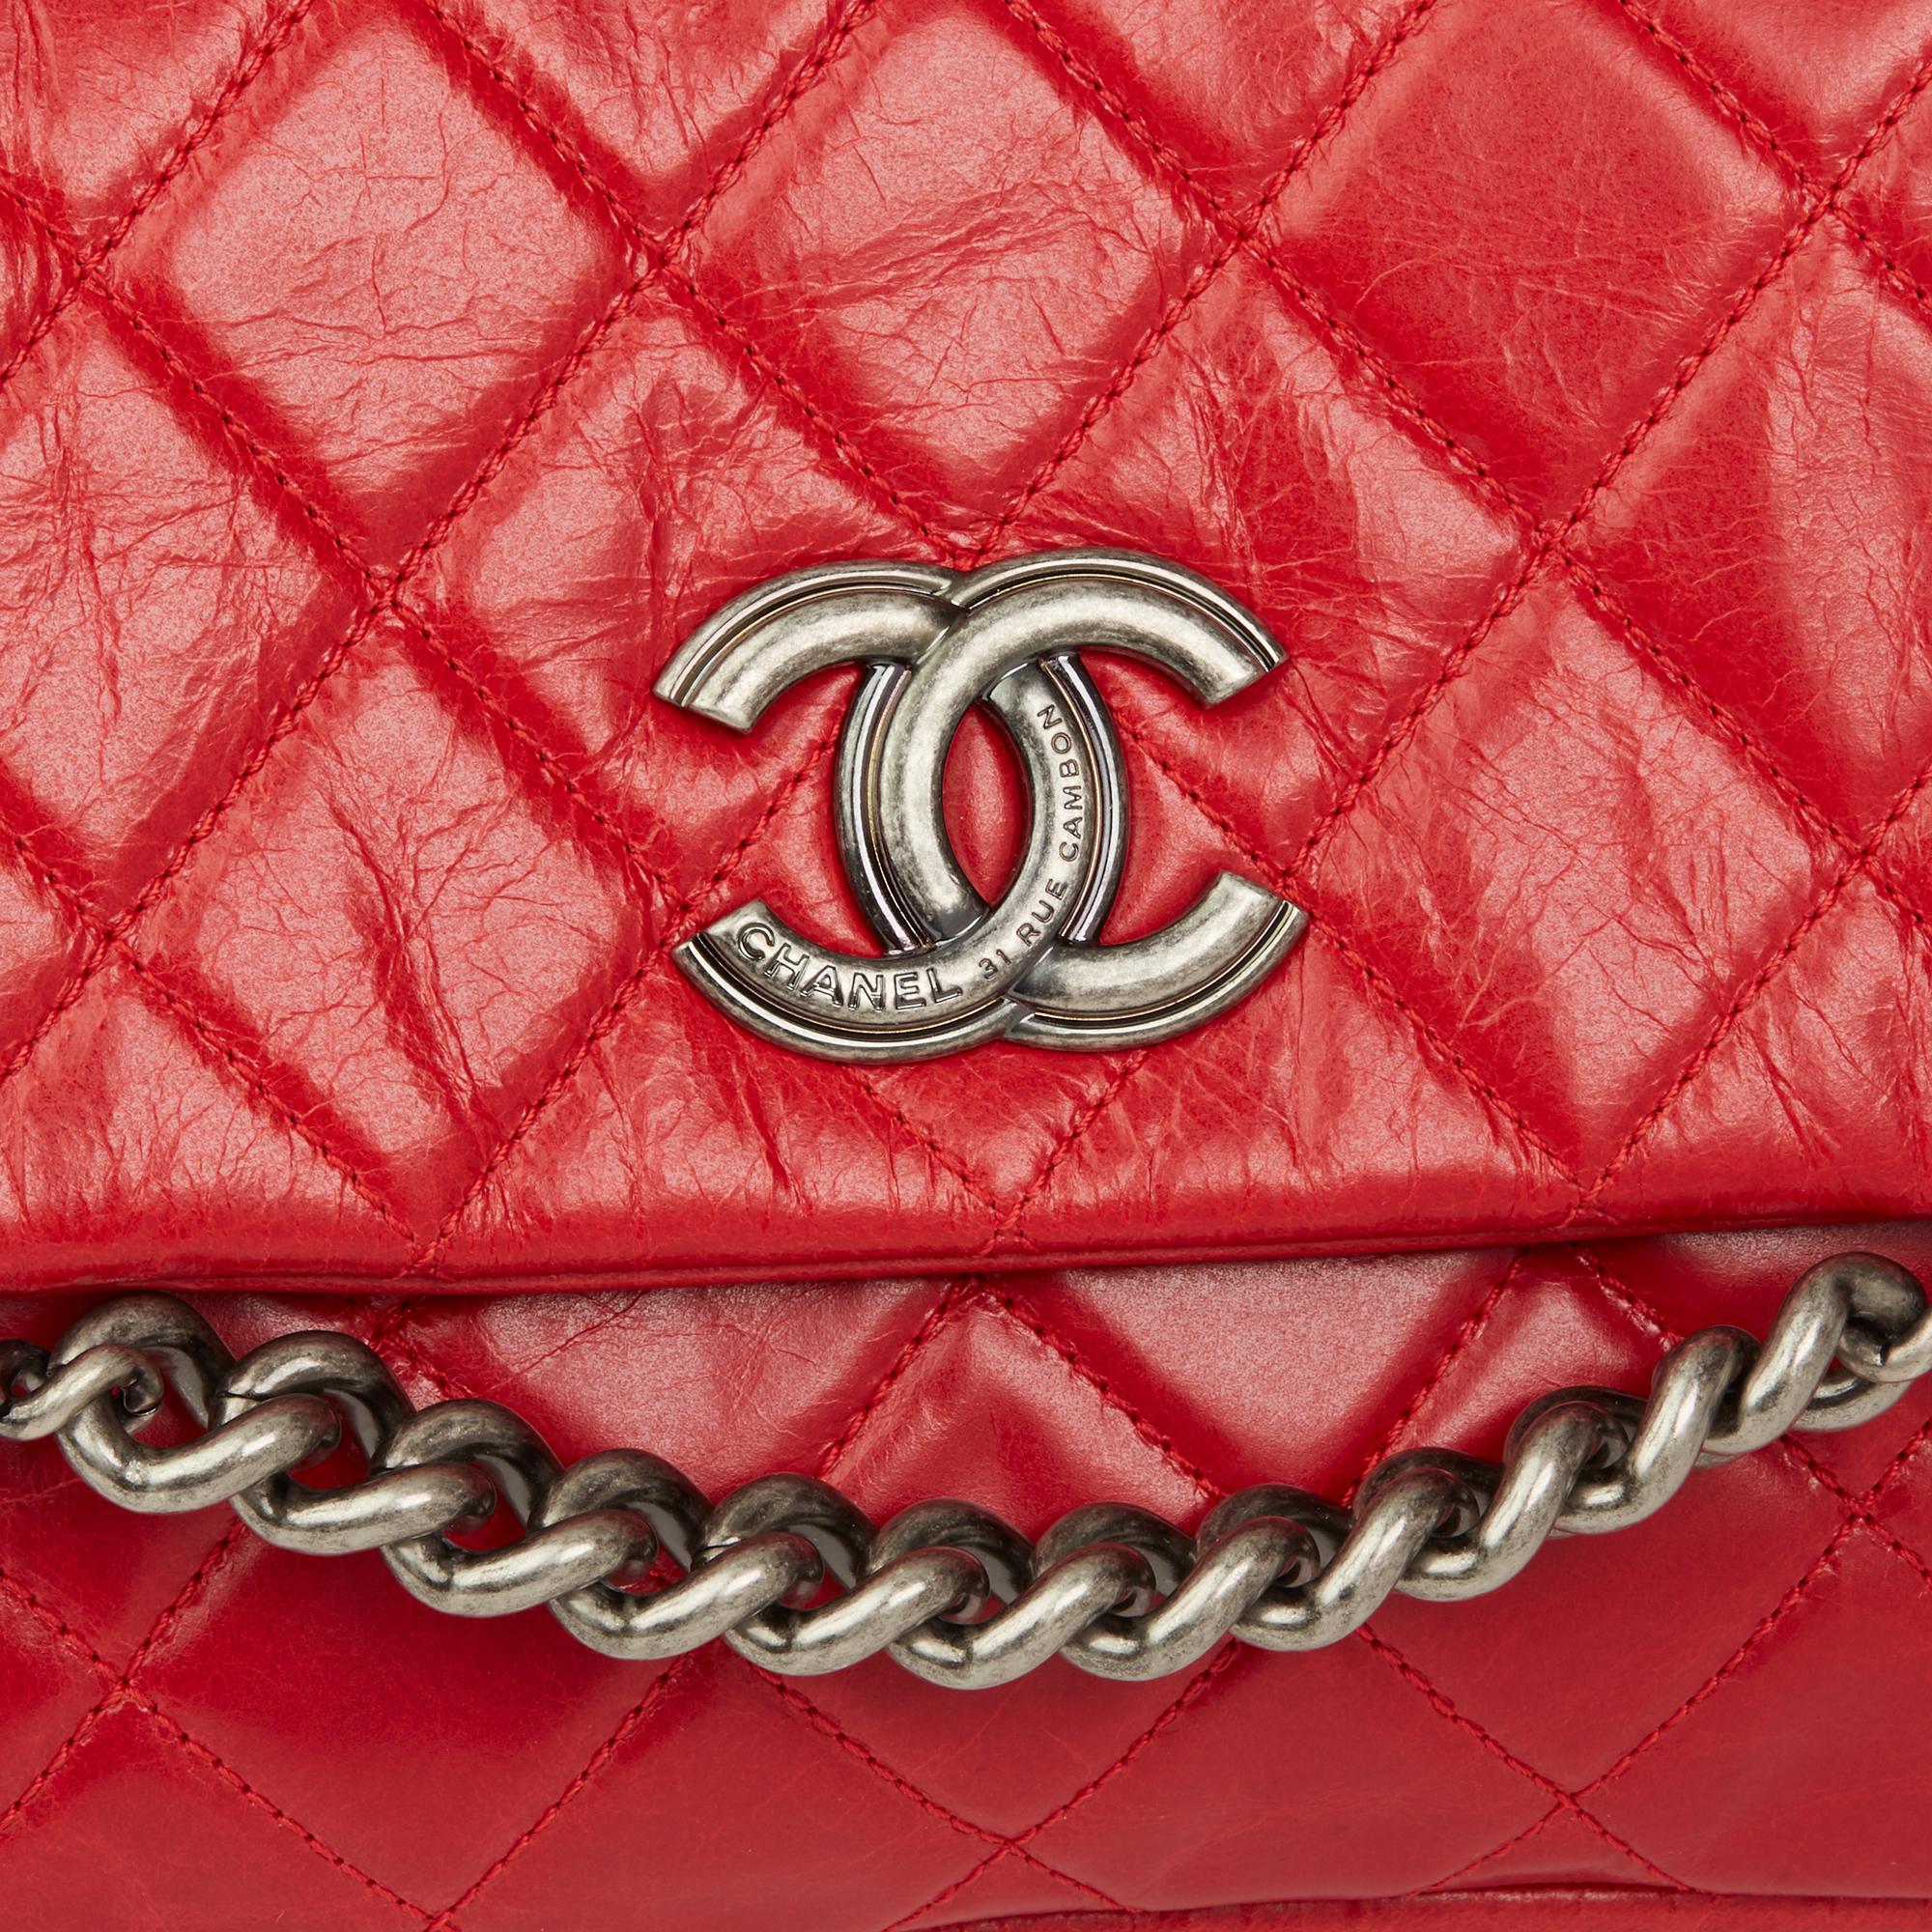 2014 Chanel Red Quilted Aged Calfskin Leather Single Flap Bag 2